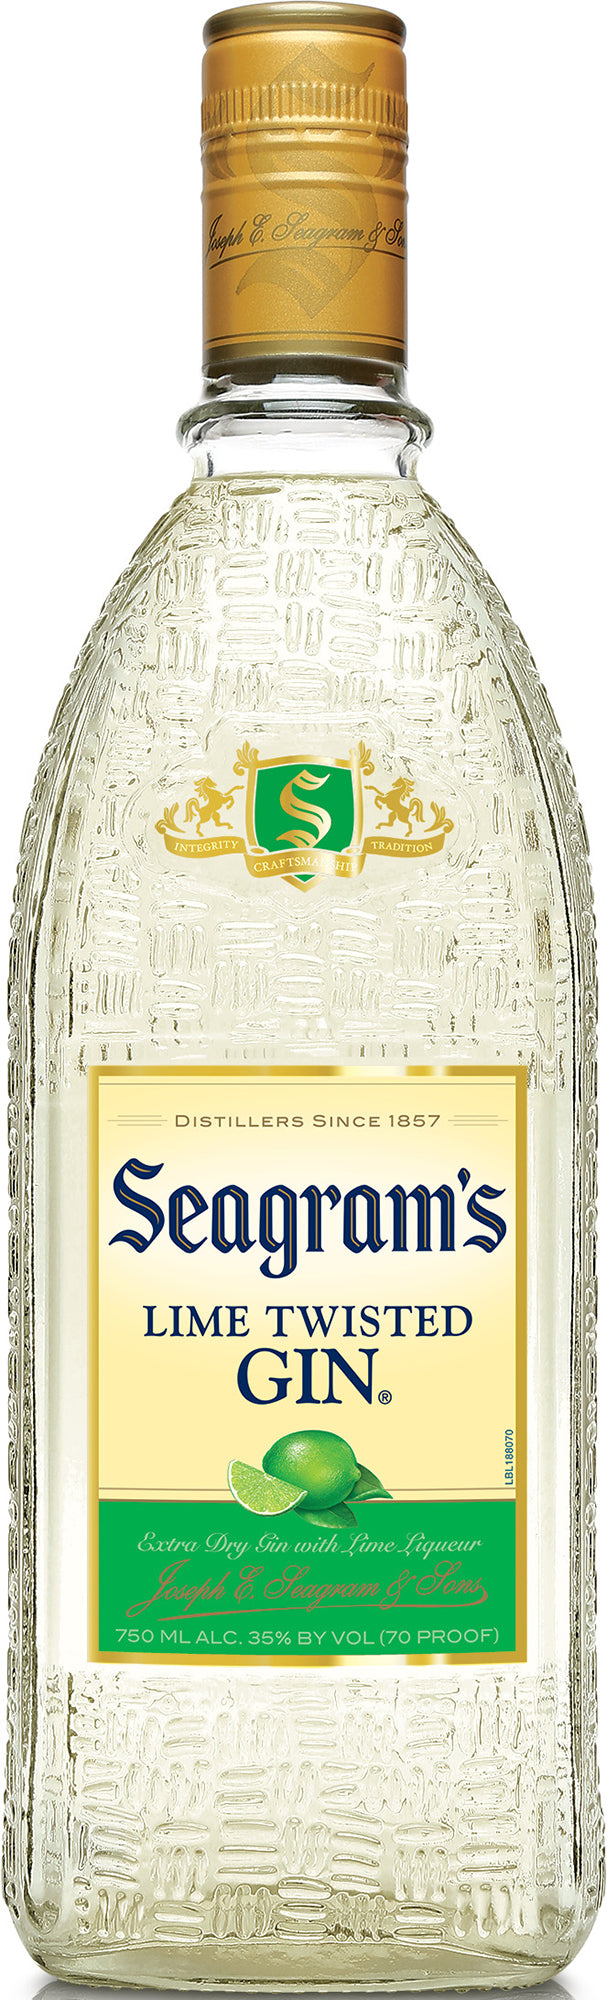 SEAGRAM'S APPLE TWISTED GIN